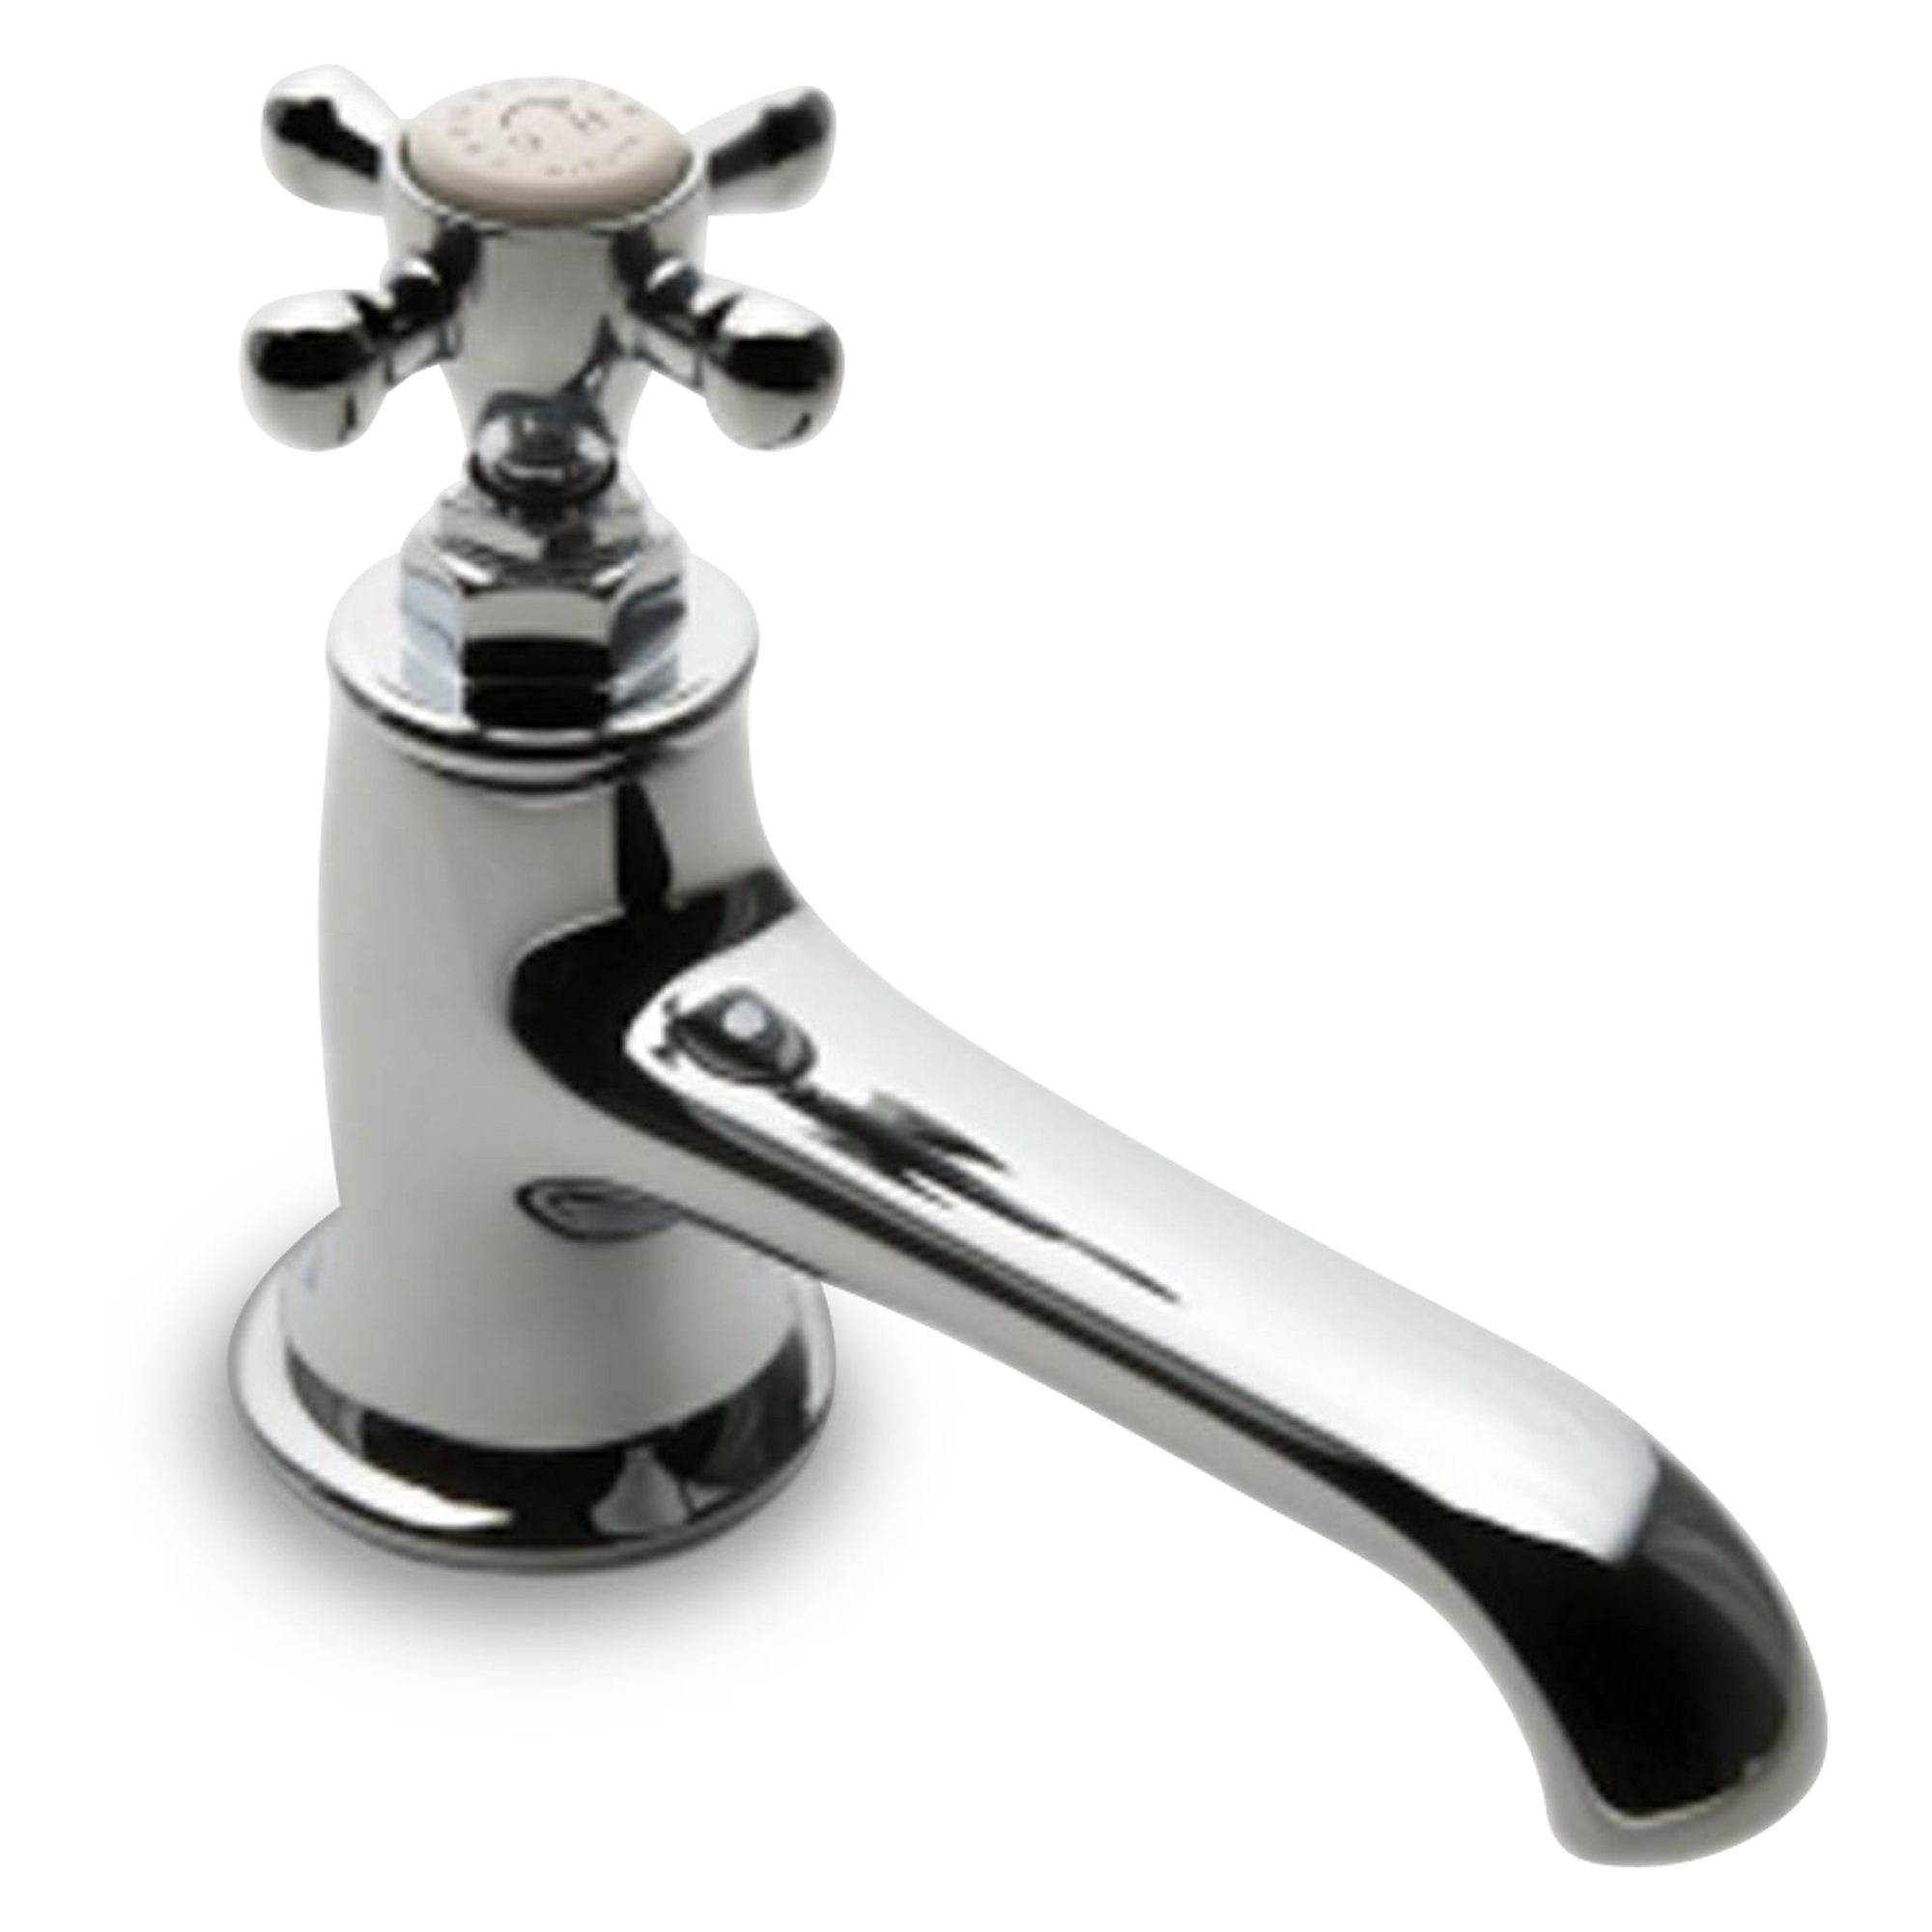 A traditional single-hole faucet with cross handle.